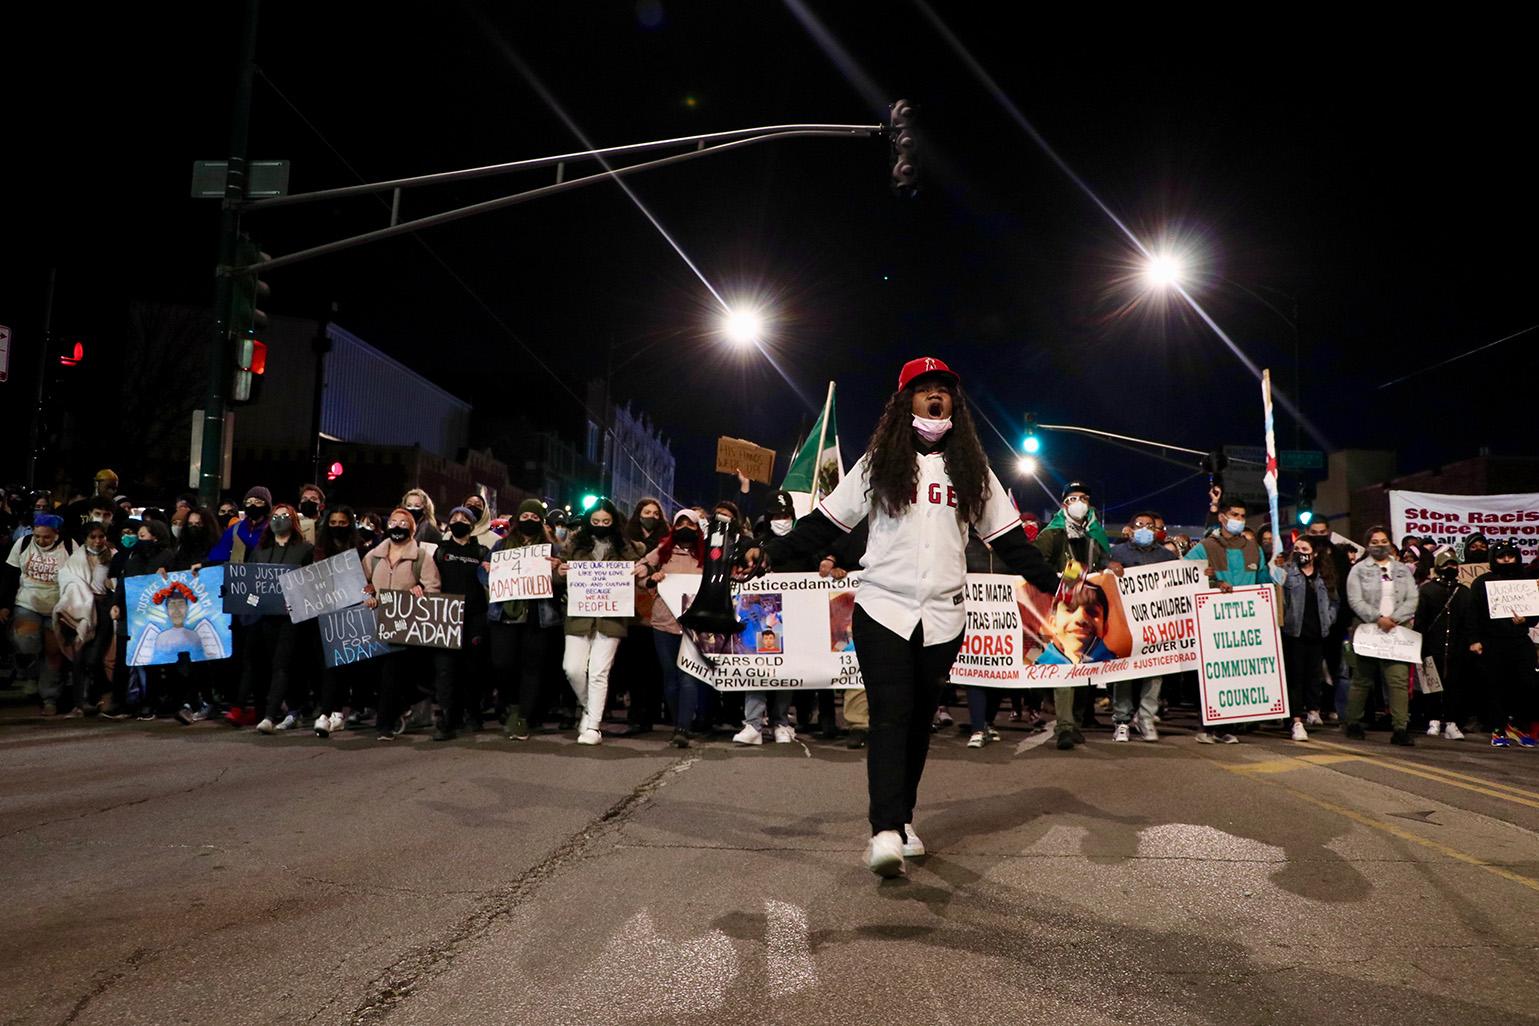 An organizer leads protesters along Fullerton Avenue April 16, 2021, during a protest over the fatal police shooting of 13-year-old Adam Toledo. (Evan Garcia / WTTW News)